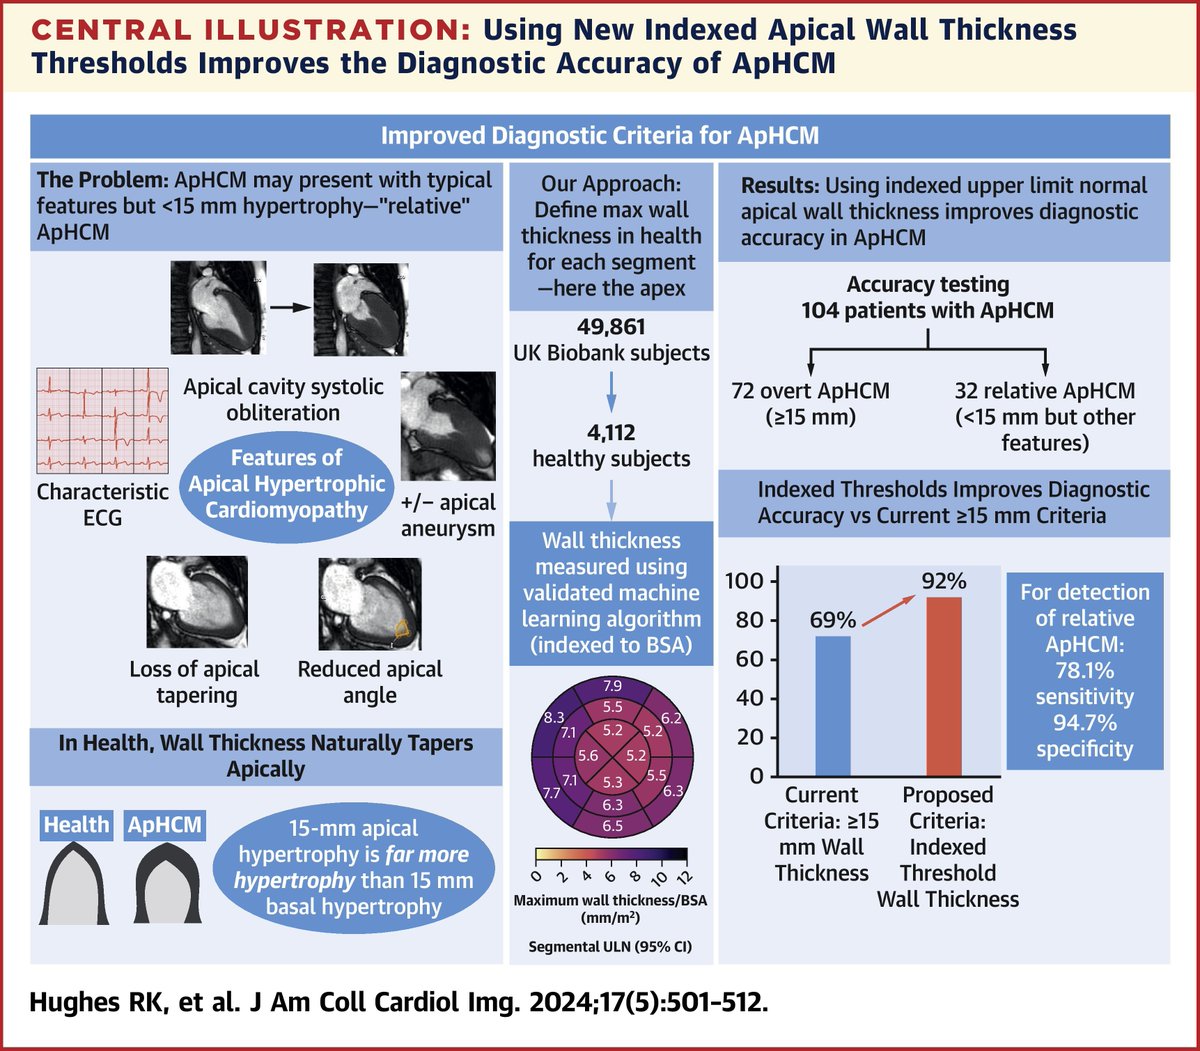 #JACCIMG #whyCMR study asks: should 15 mm be the wall thickness cutoff for the diagnosis of apical hypertrophic #cardiomopathy? 🤔 bit.ly/4dBrRAC #ApHCM #MachineLearning @DrRebeccaHughes @JccmoonMoon